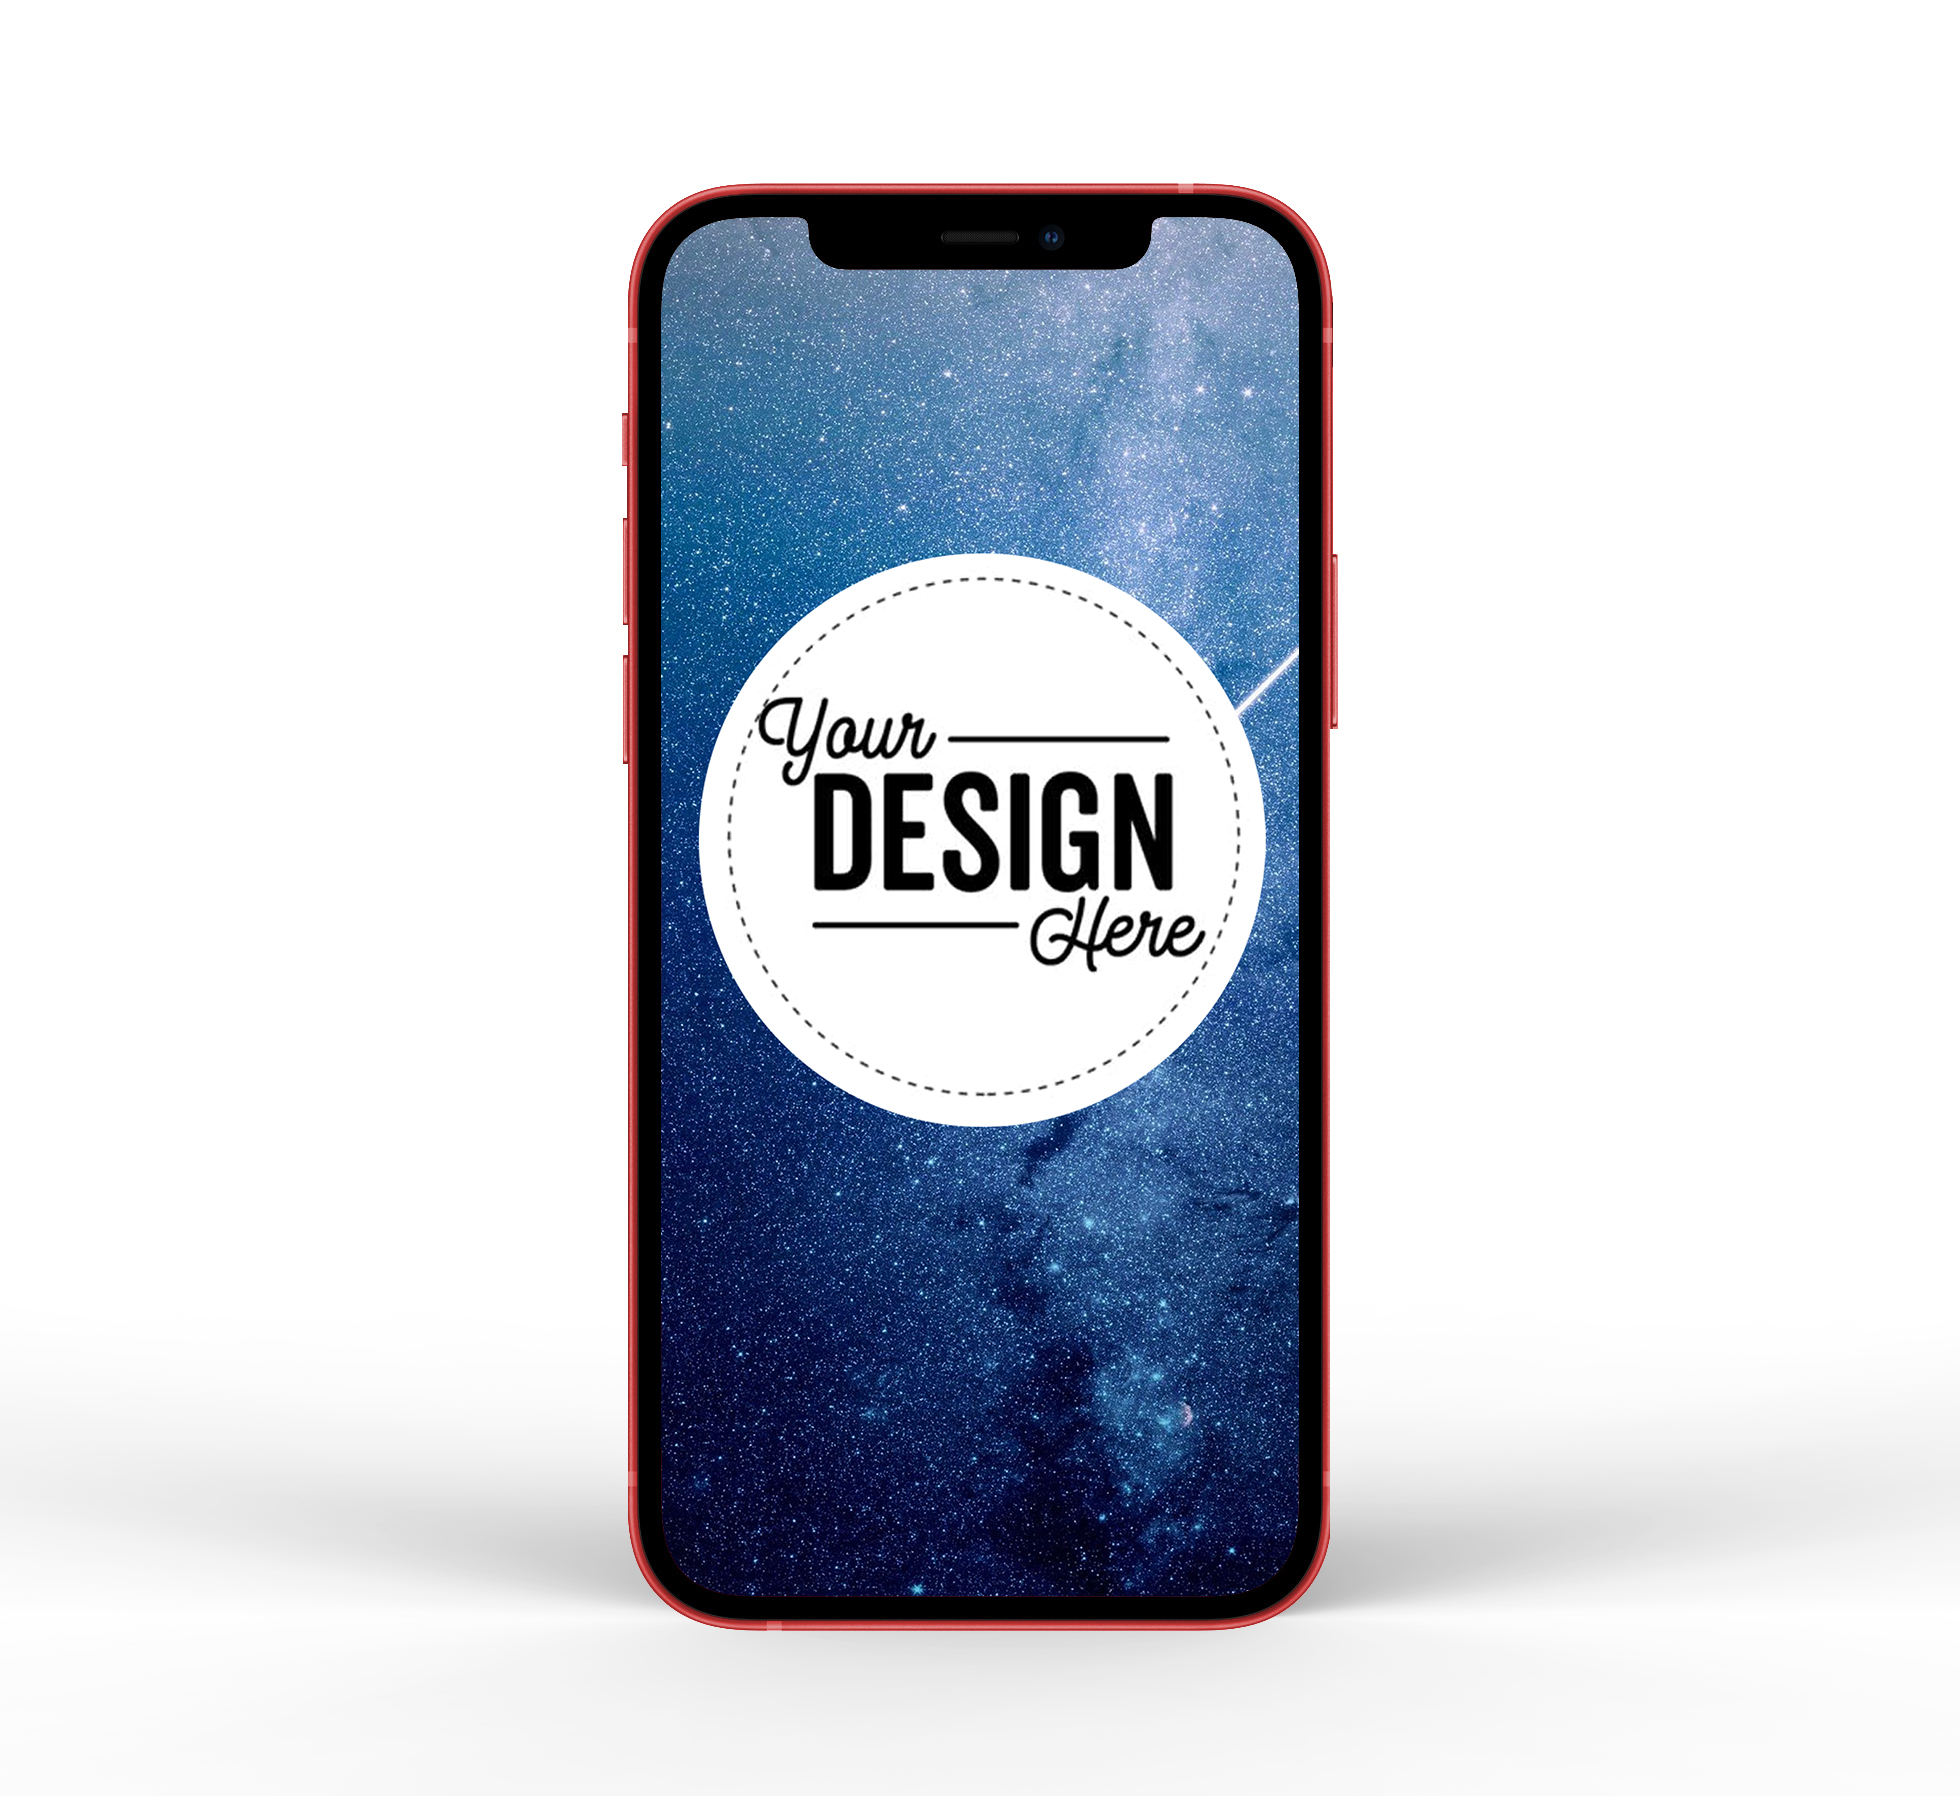 iPhone 12 Mockup - iPhone 12 Mockups for creatives